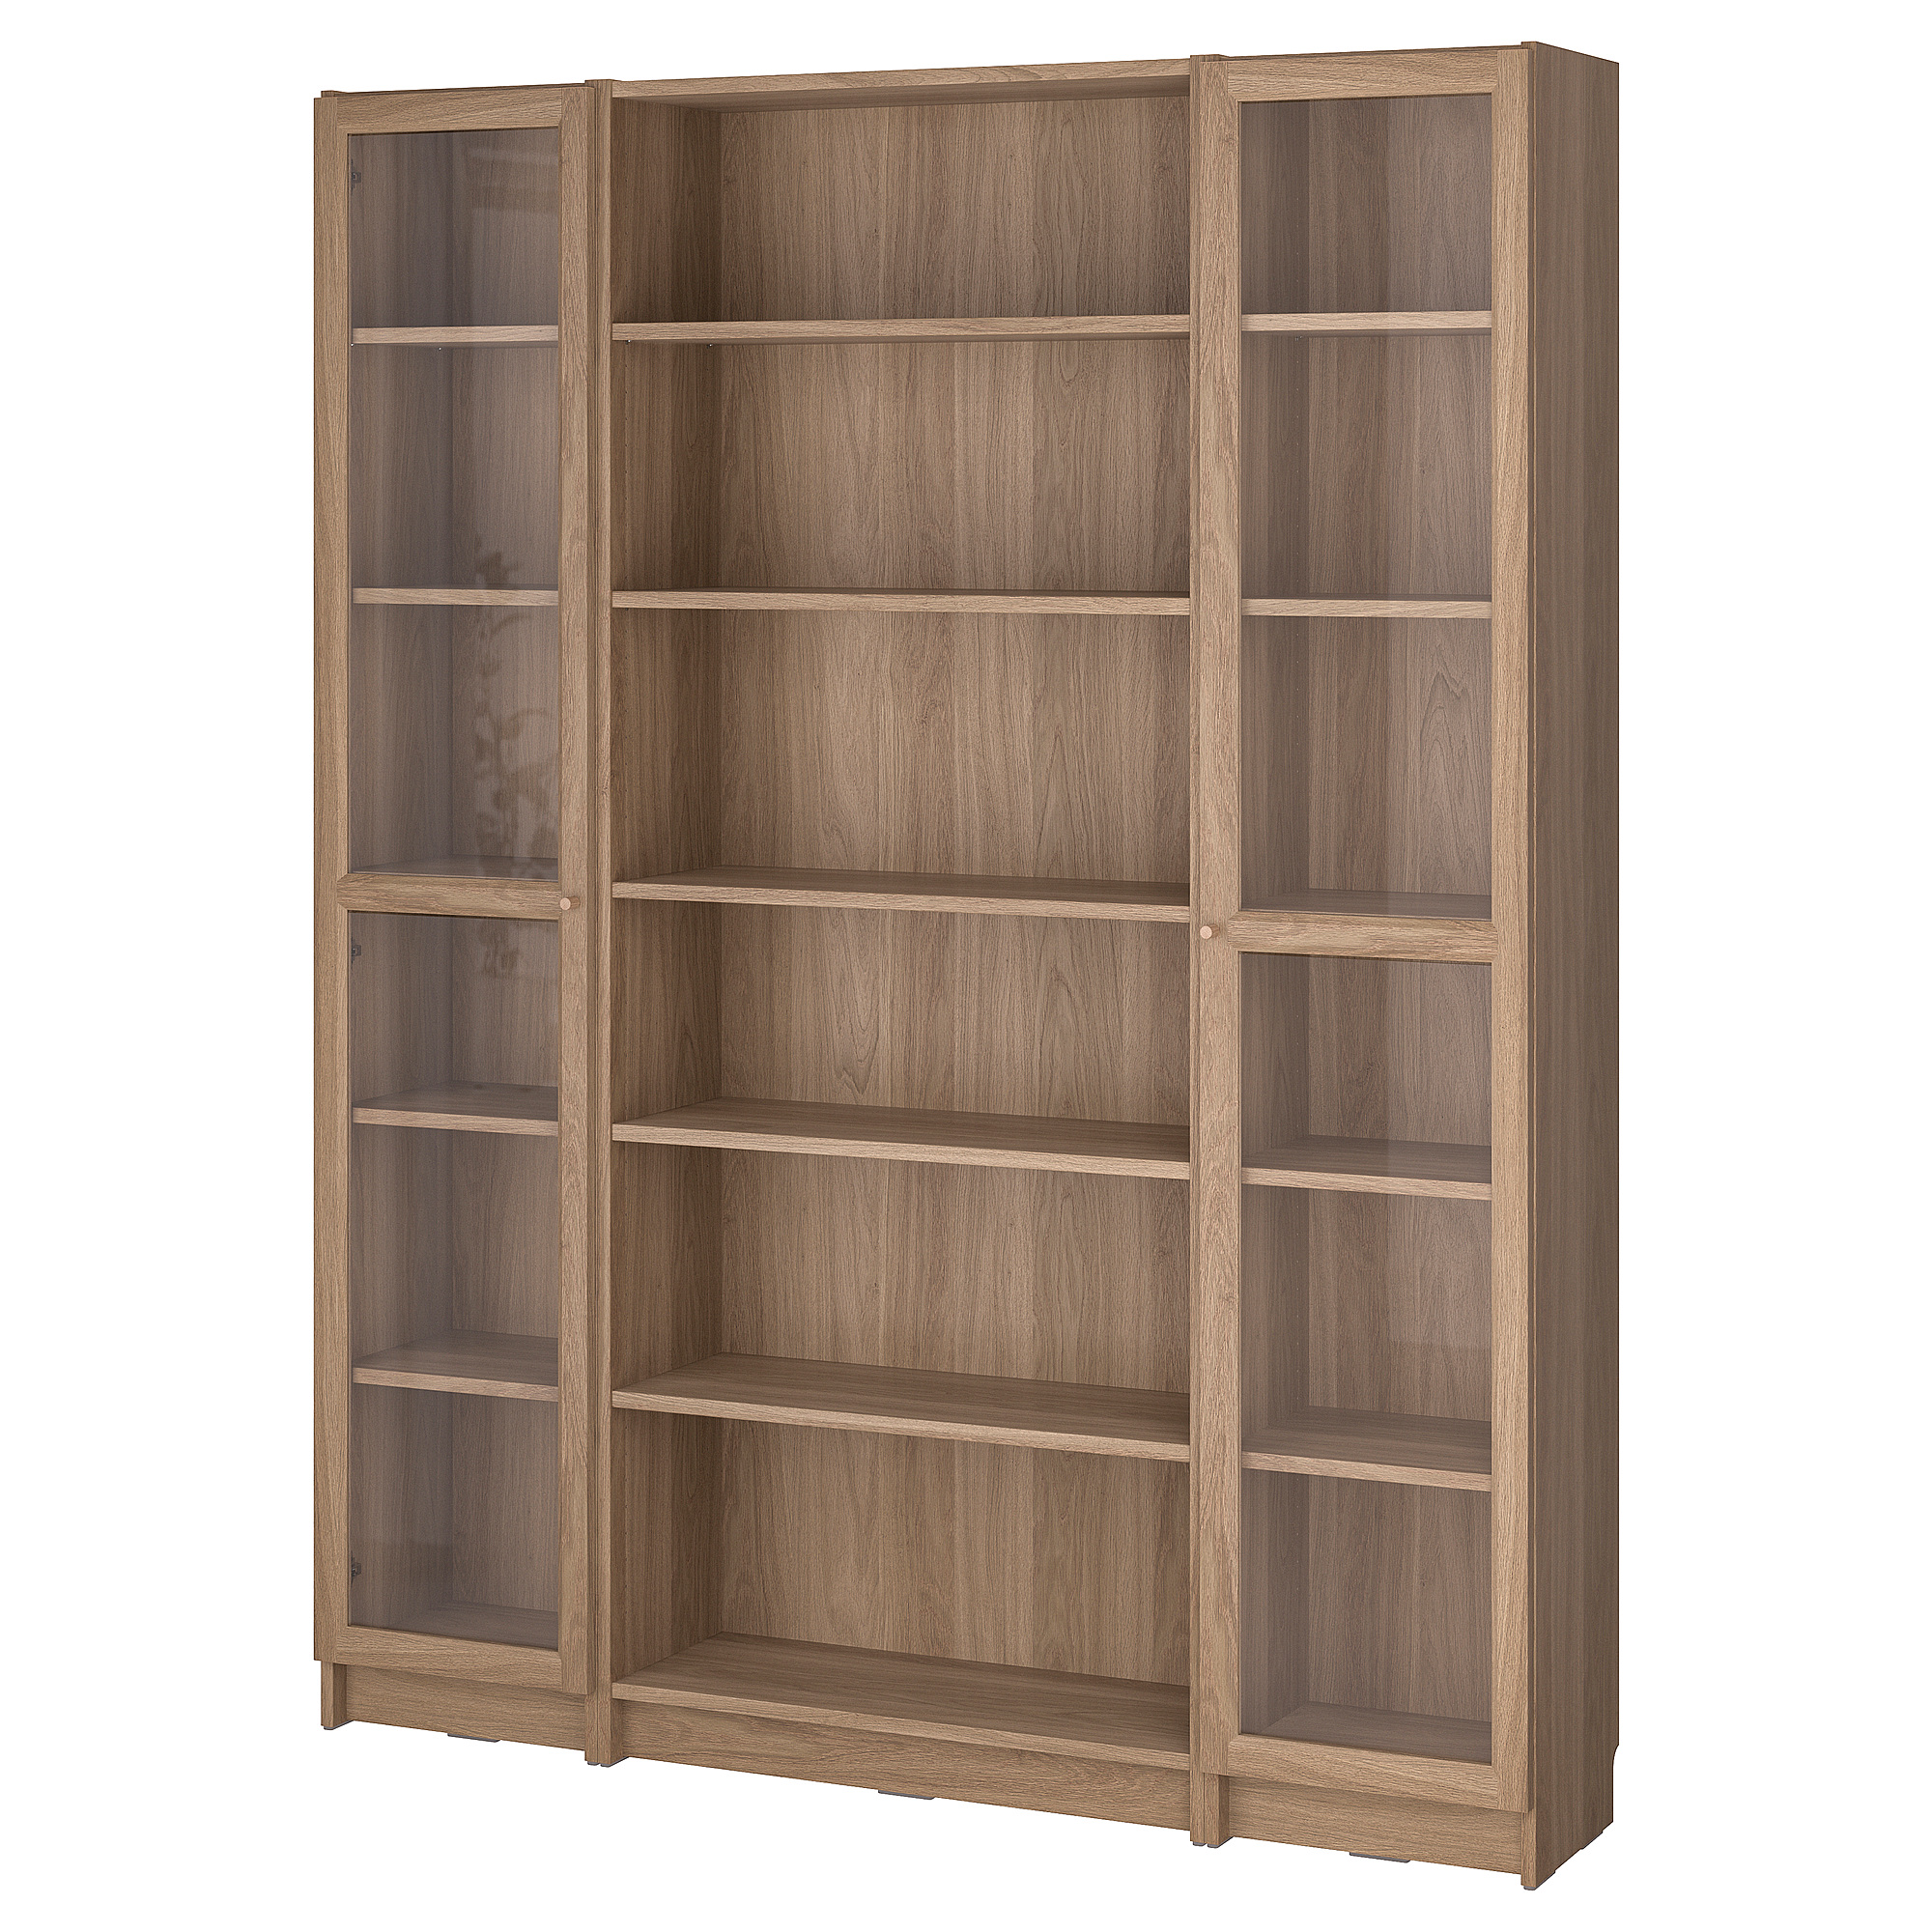 BILLY/OXBERG bookcase combination w glass doors